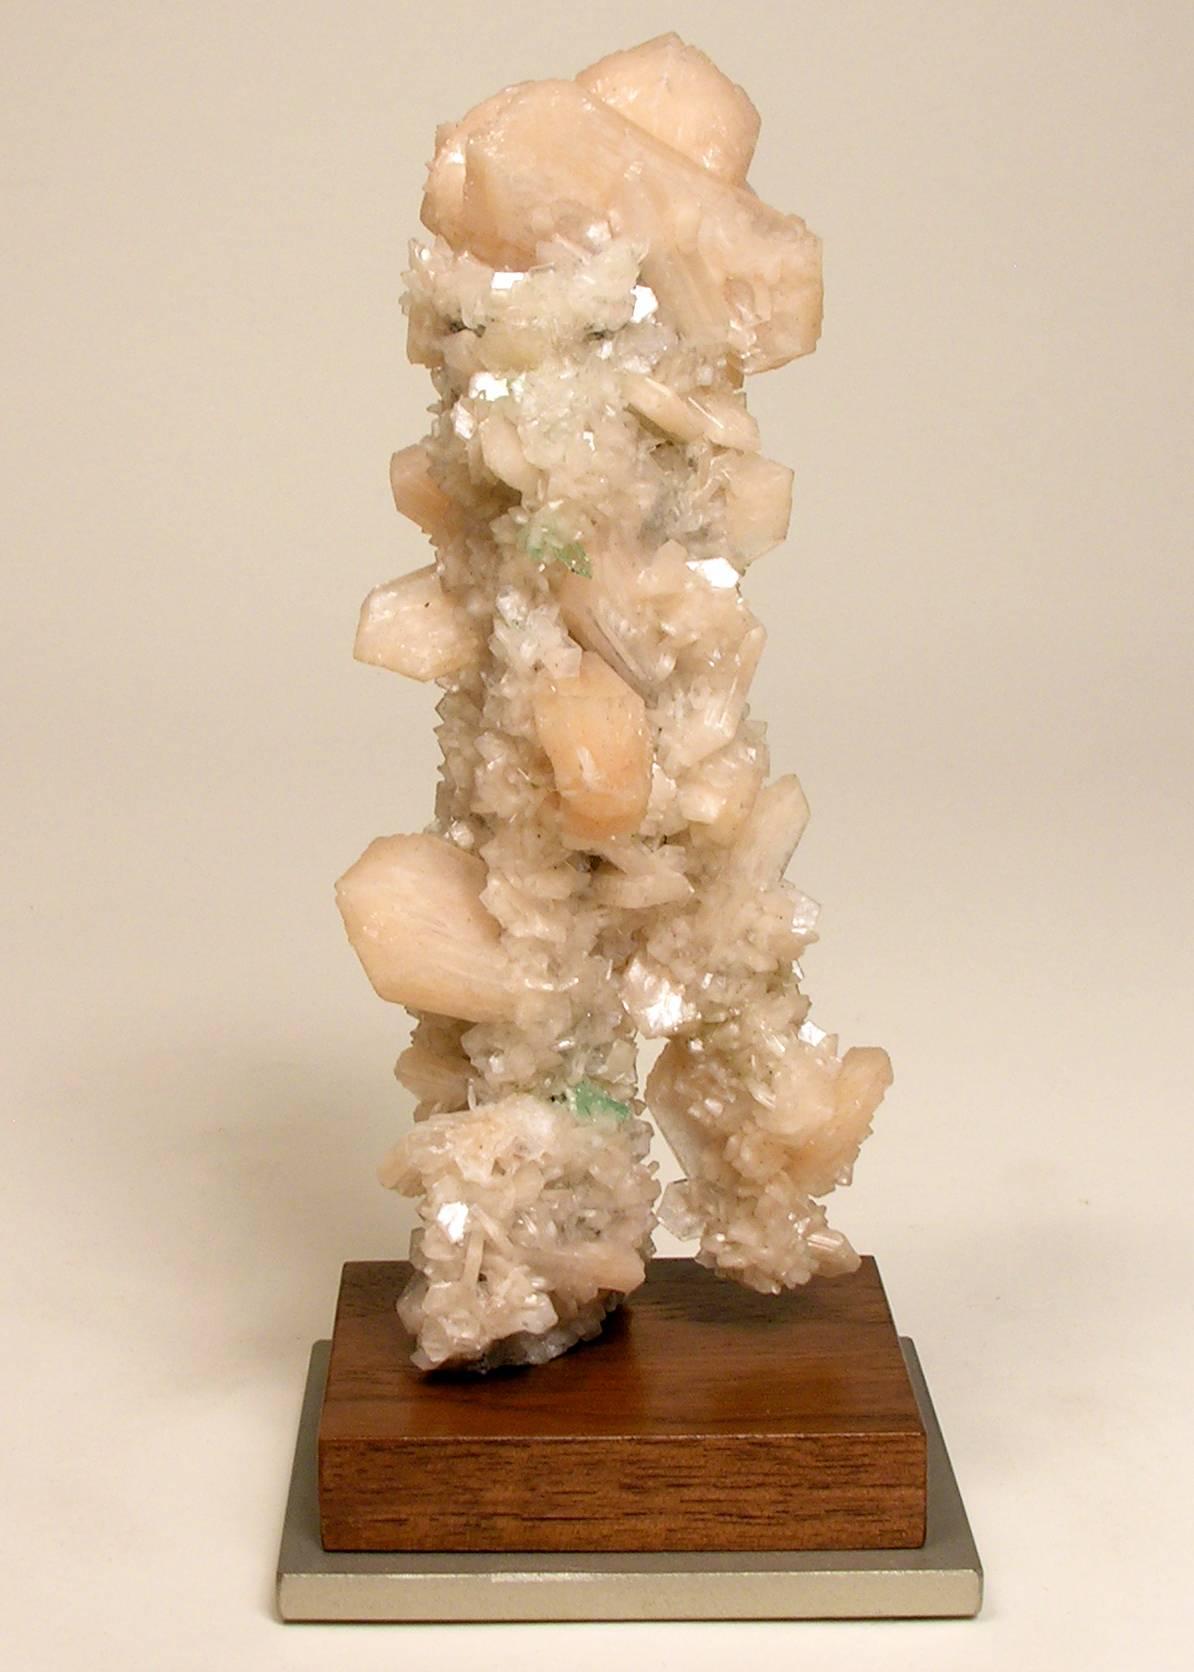 Naturally formed mineral peach stilbite on apophyllite sculpture

A mineral specimen in the form of an abstract walking figure. Mounted on a custom walnut and satin nickel painted base.
Custom basing options available with an additional fee. 